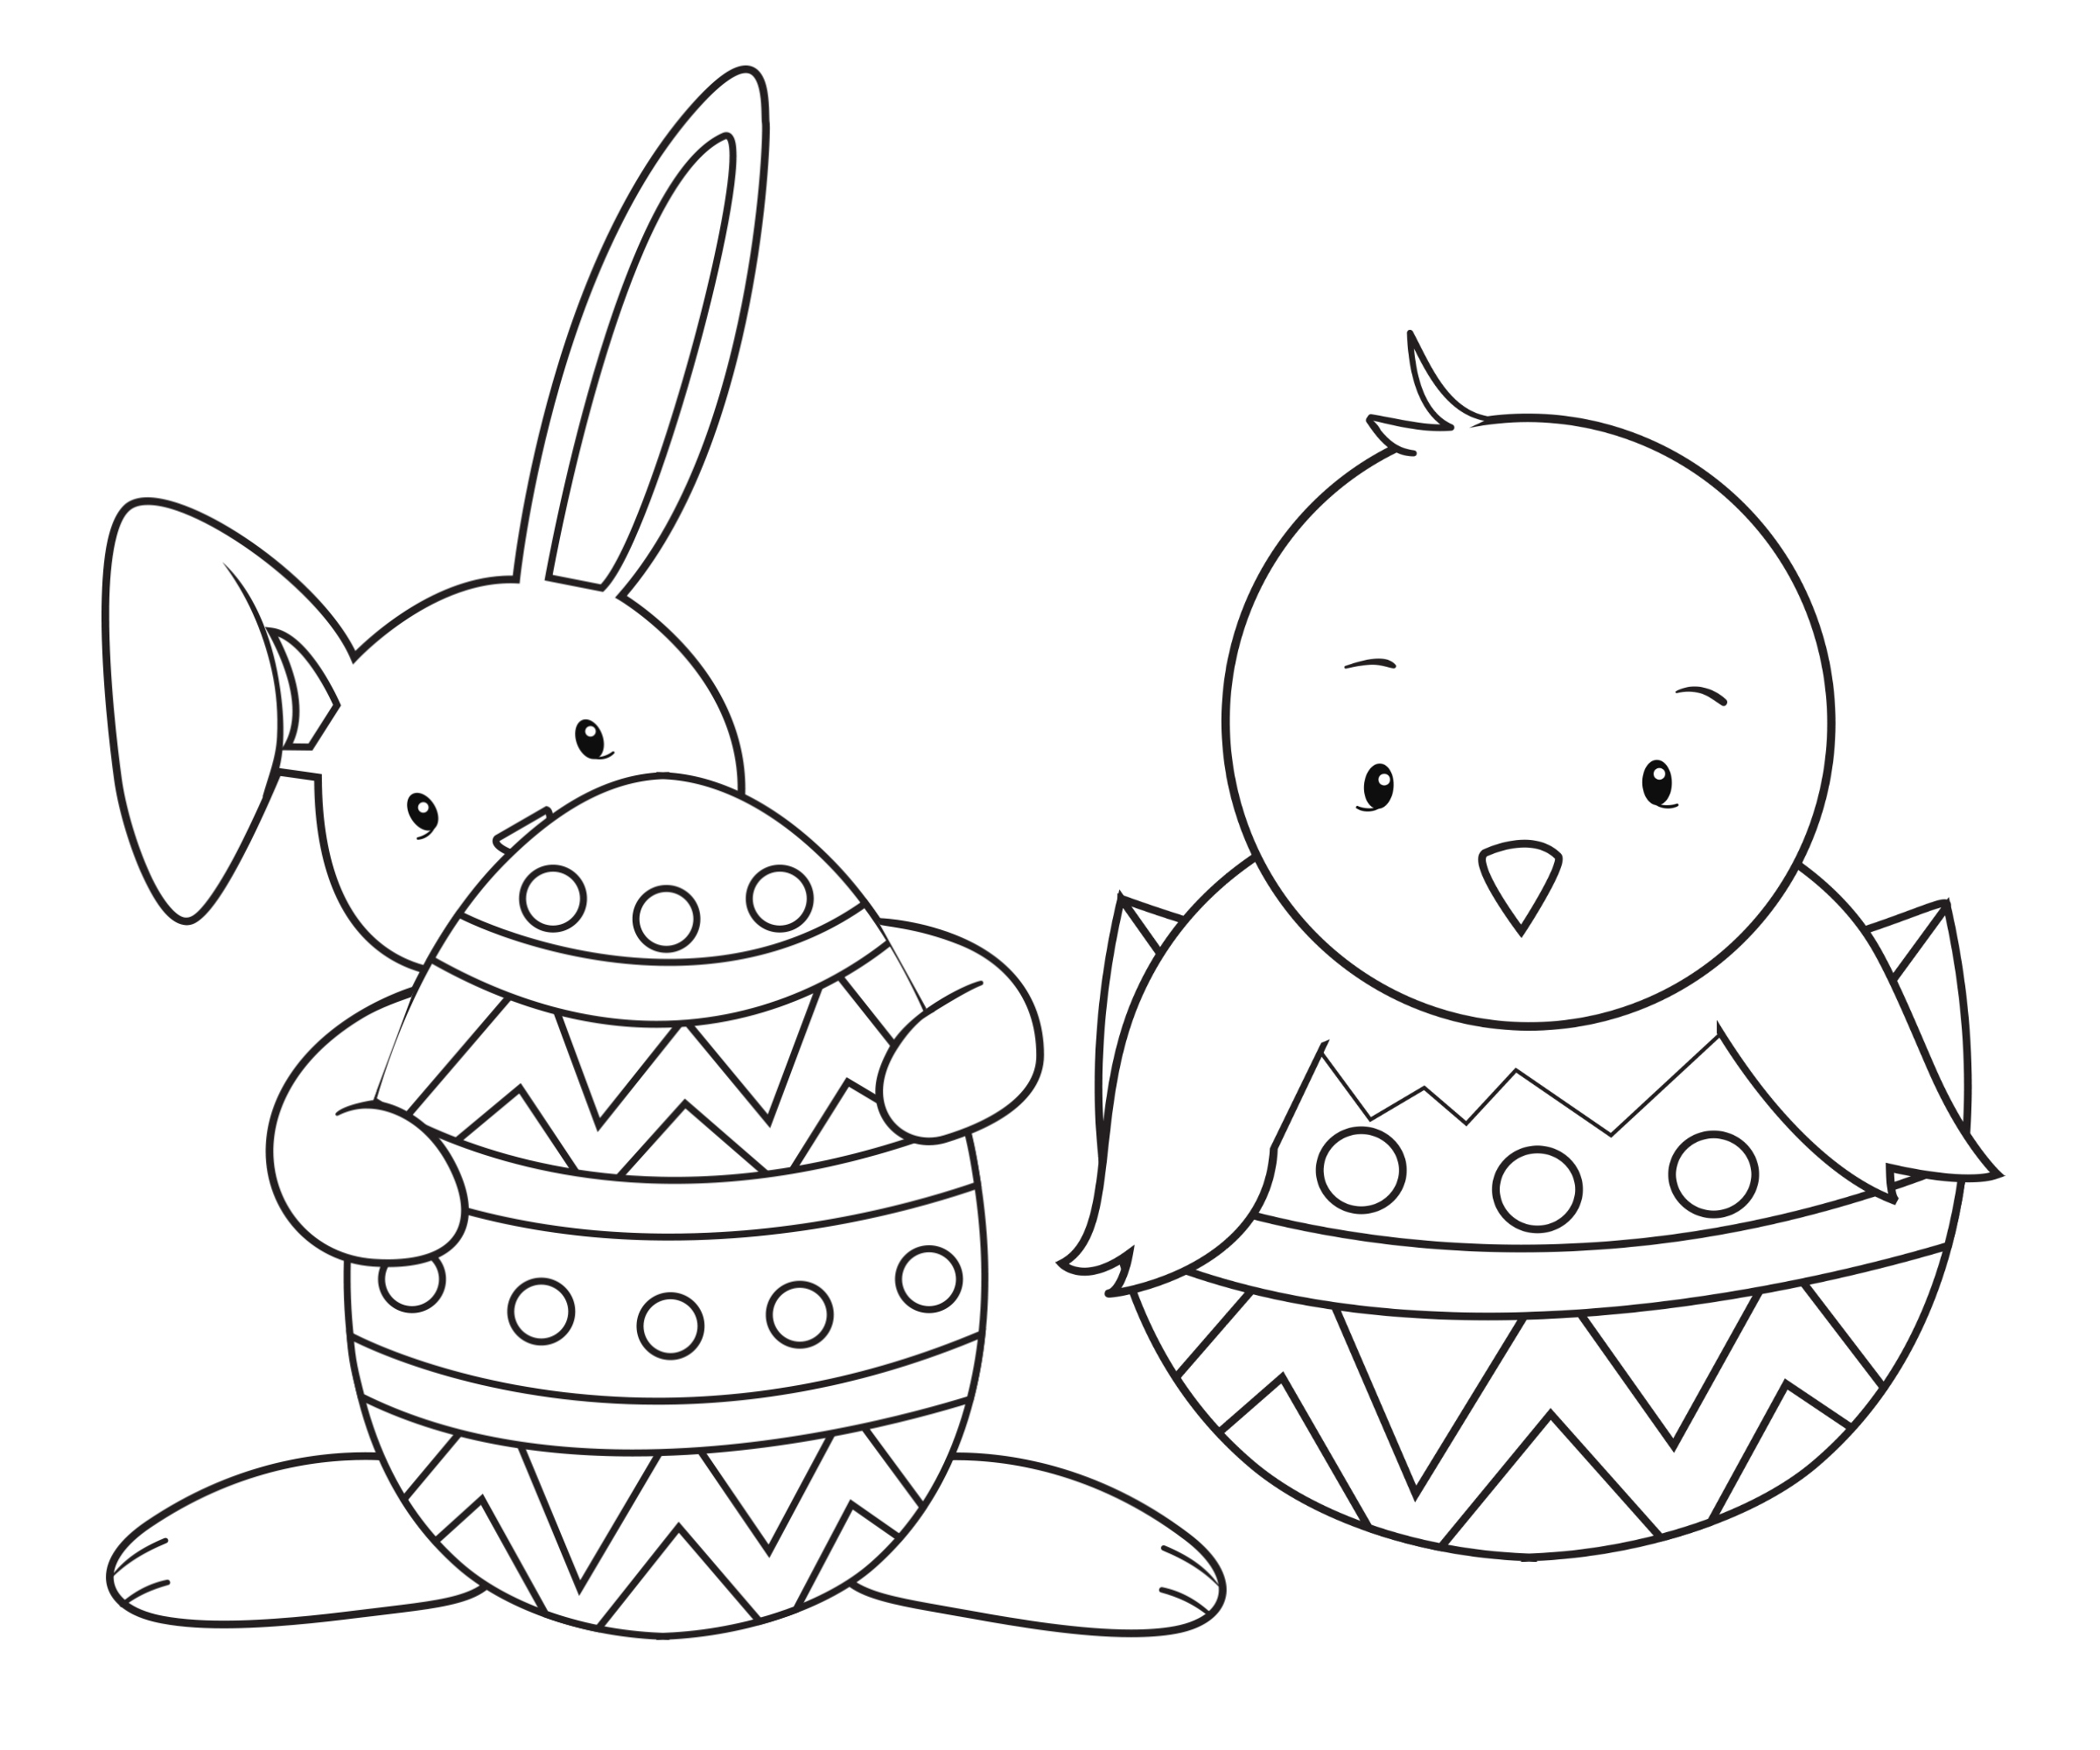 Easter Printable Coloring Pages Boys - 17.5.kaartenstemp.nl • - Free Printable Easter Coloring Pages For Toddlers